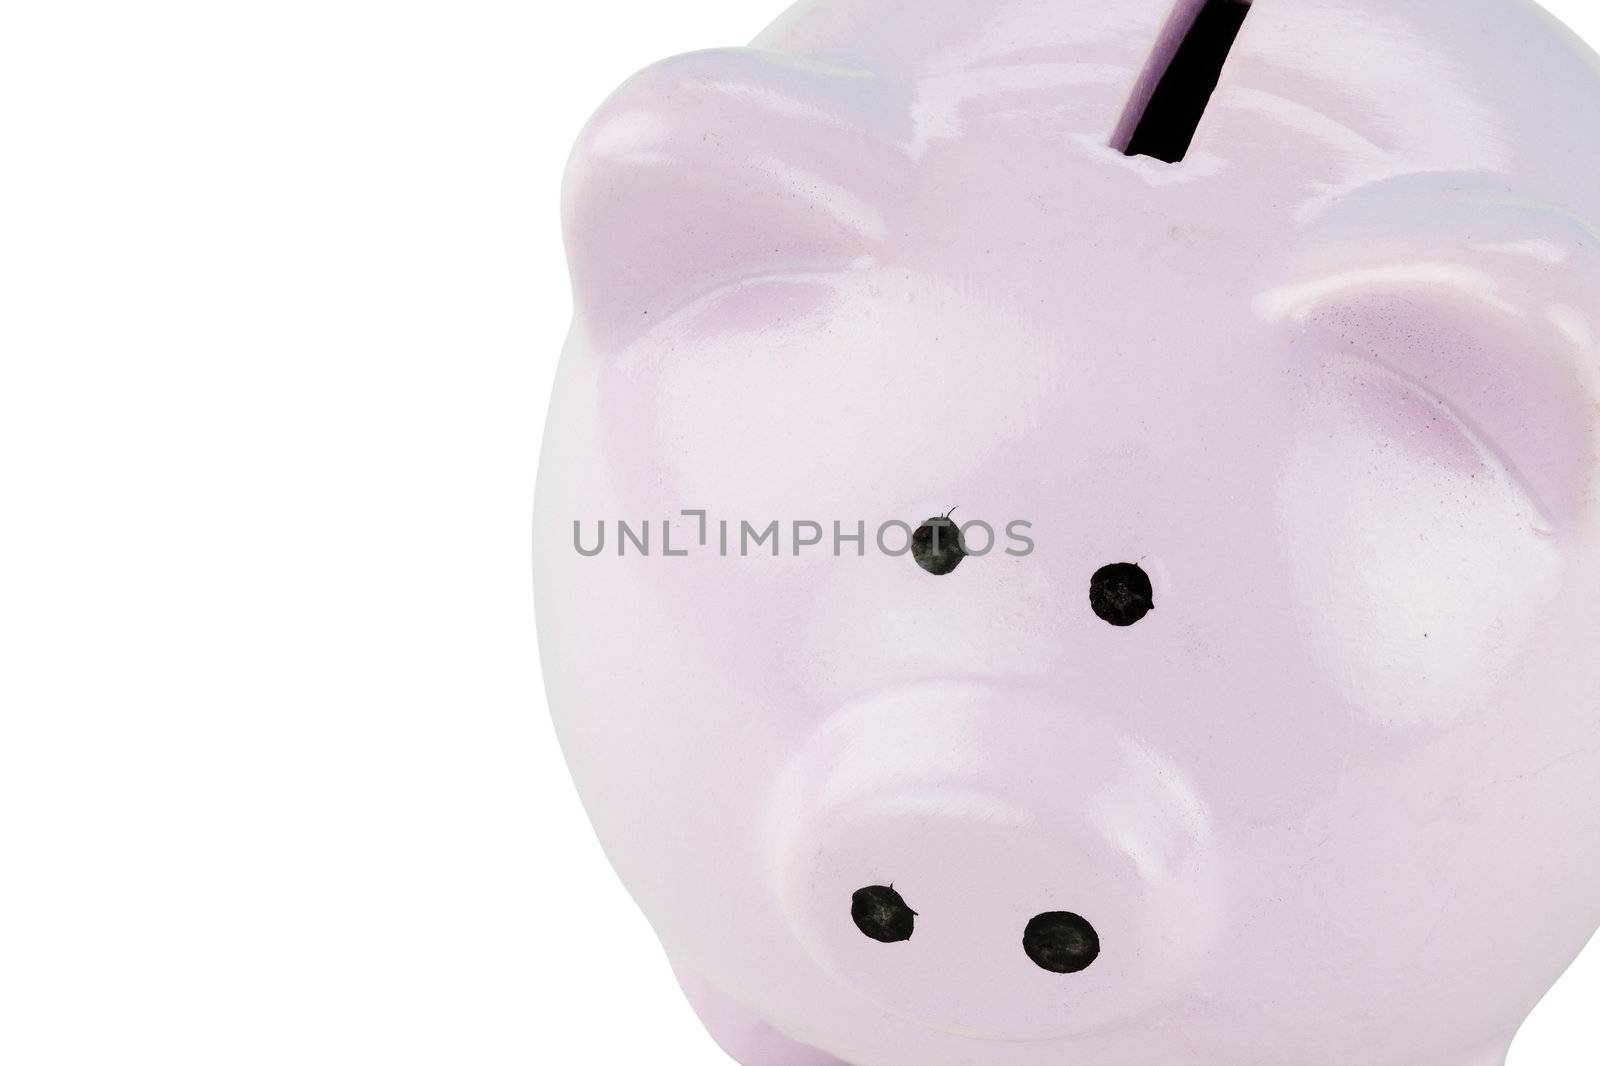 Pink piggy bank isolated on a white background with clipping path included.
